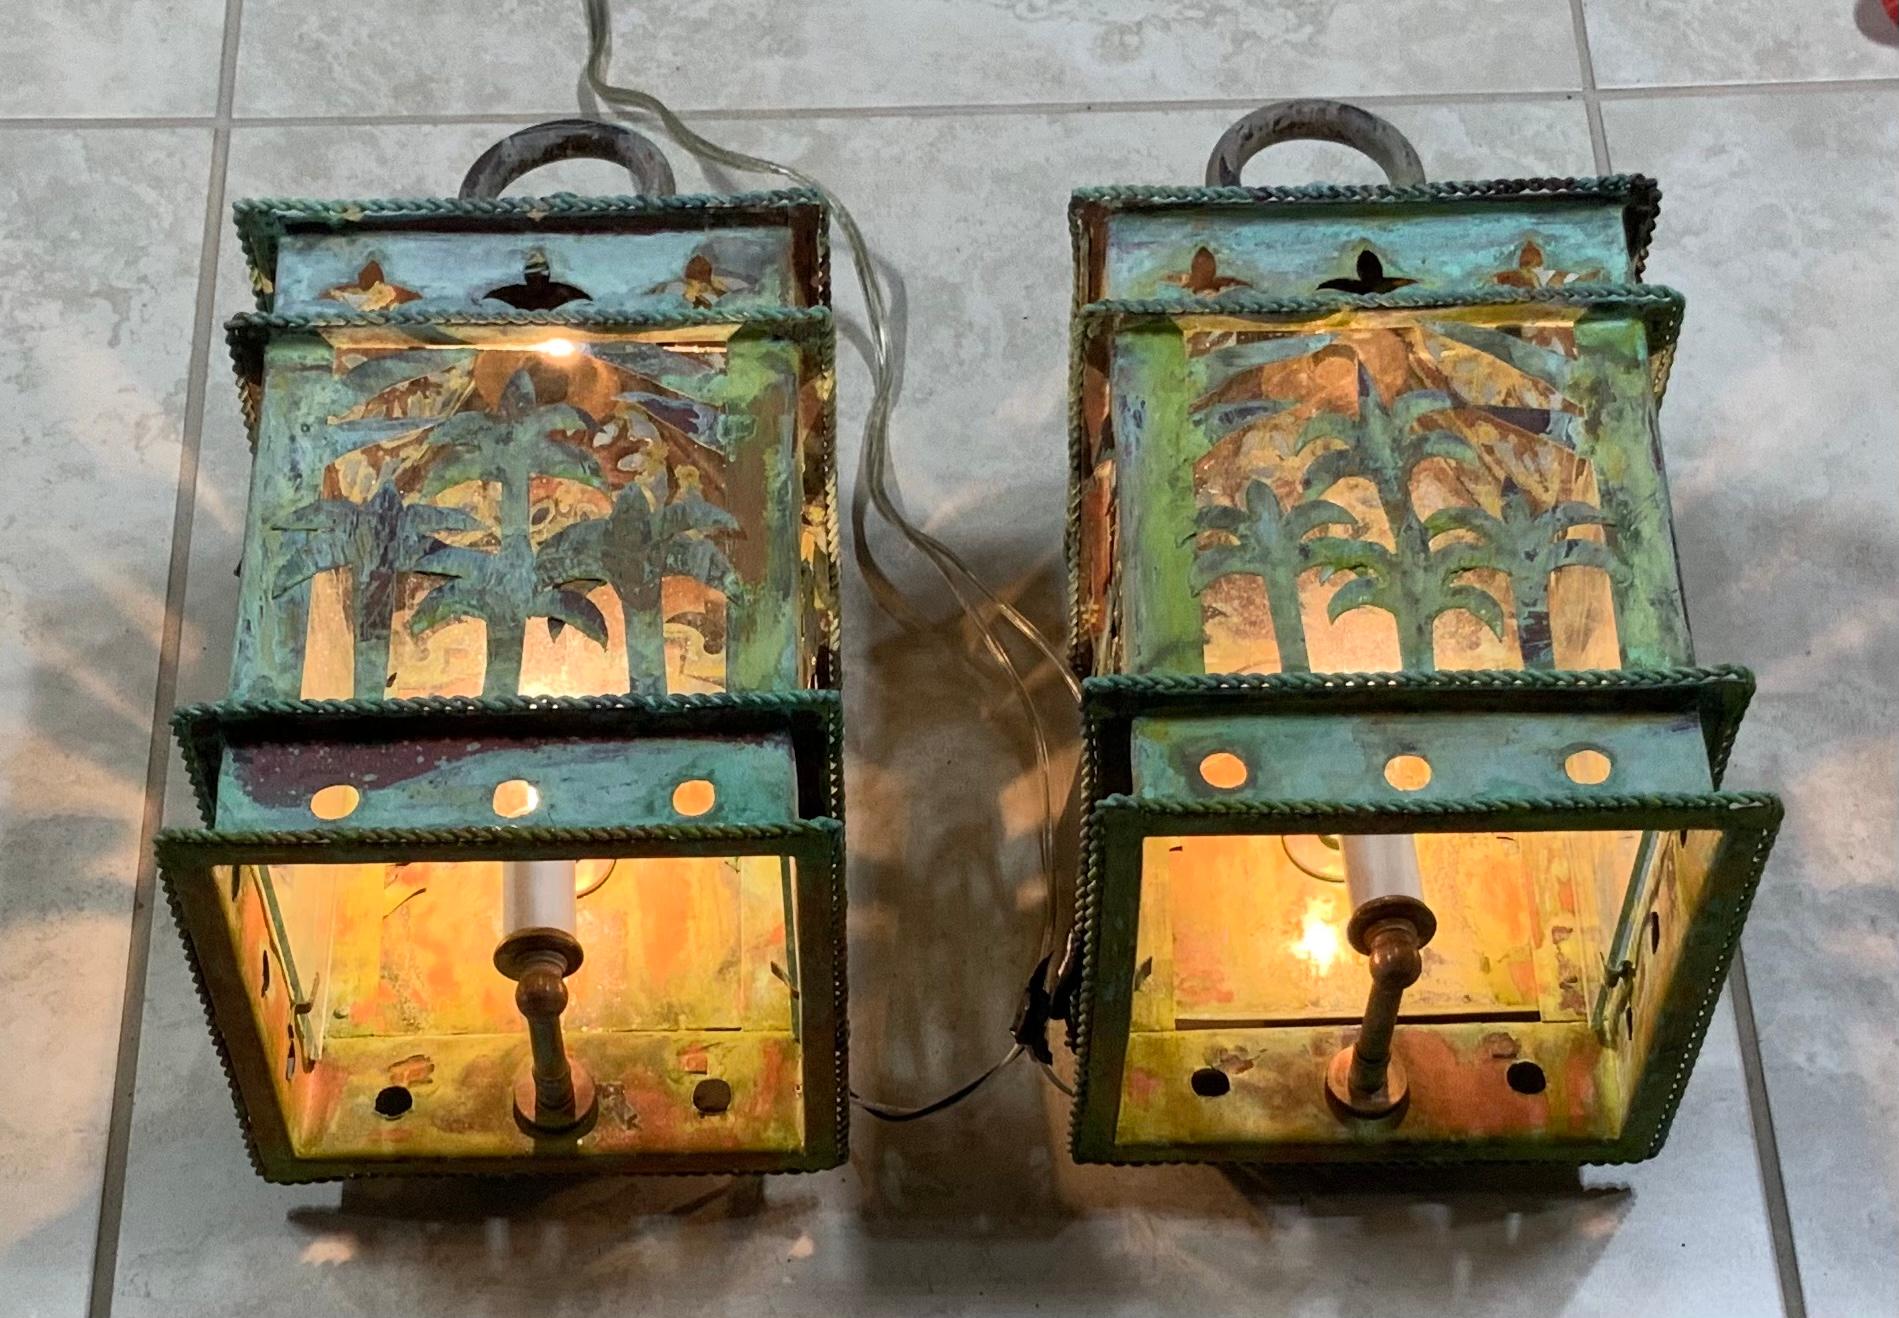 Funky beautiful pair of lantern made of copper artistically hand crafted, one 60/watt light each lantern.
This pair is not suitable for wet locations. Will look great indoor or under canopy.
Originally the pair were hanging lantern, converted to